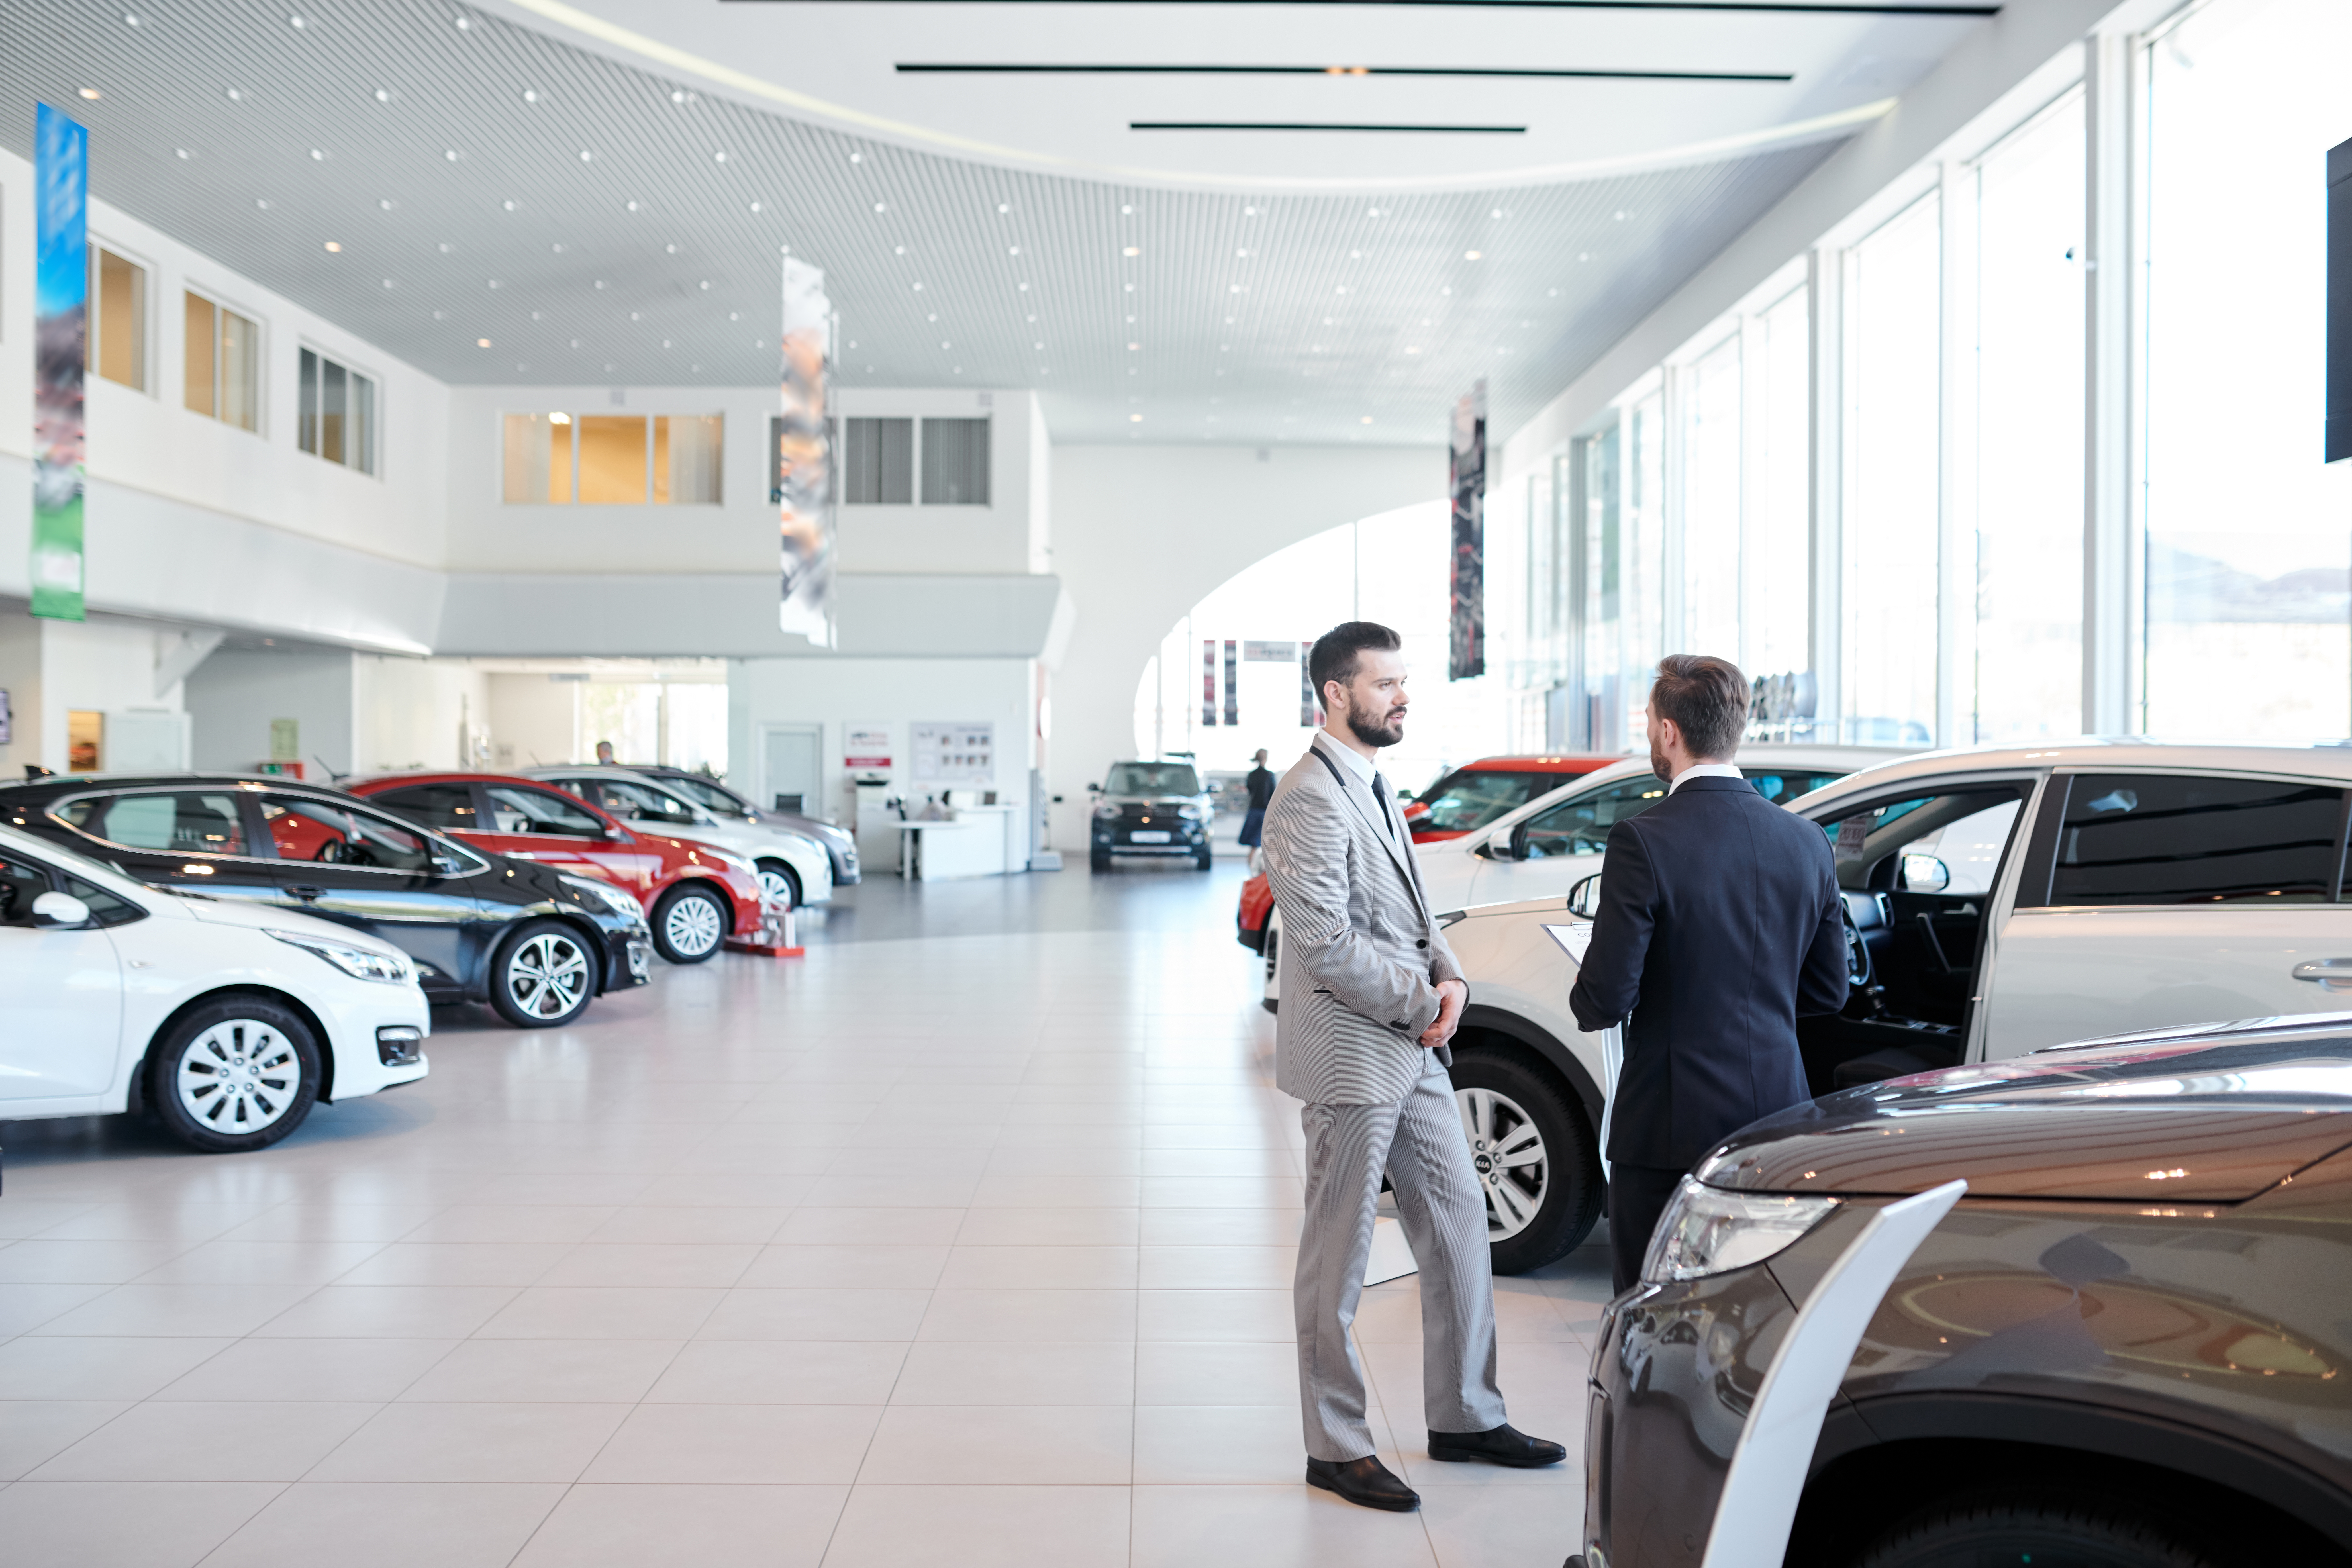 Two sharply dressed sales professionals discussing performance on a bright car dealership floor, reminiscent of dealerships that have improved performance and customer satisfaction with employee scorecards. Their earnest conversation mirrors the collaborative approach that contributes to a dealership's success and positive customer experiences.